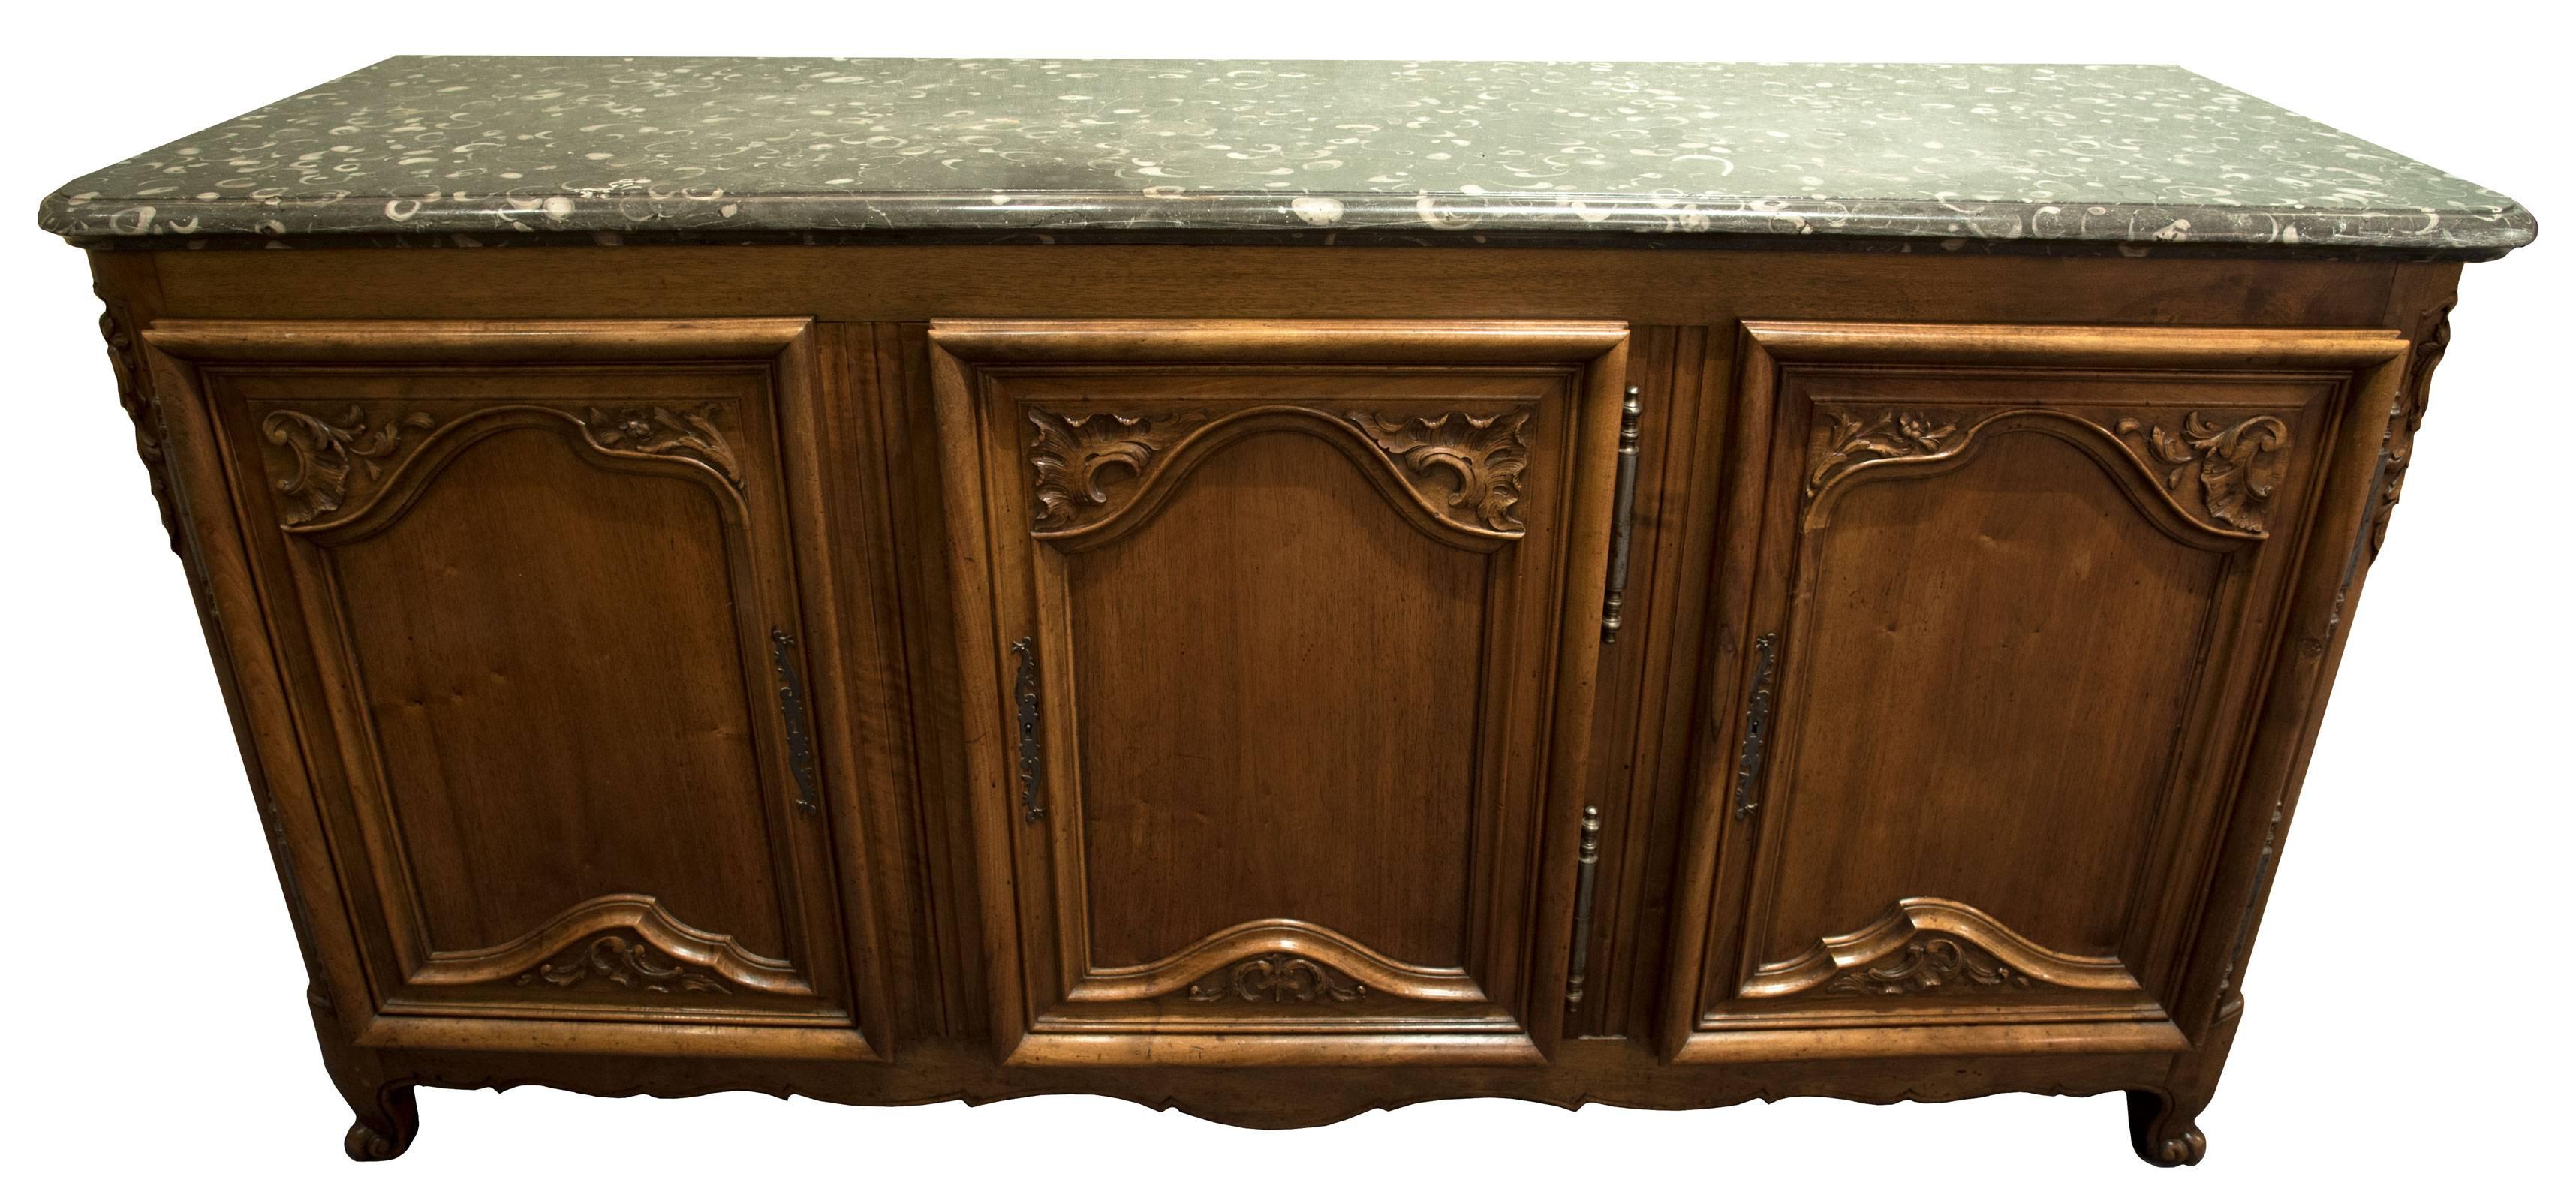 A walnut sideboard with green marble top with a moulded edge above three cabinet doors with silver self-mortised hinges and the door fronts decorated with carved relief details in the corners. The sides are carved with a simple panel form and are